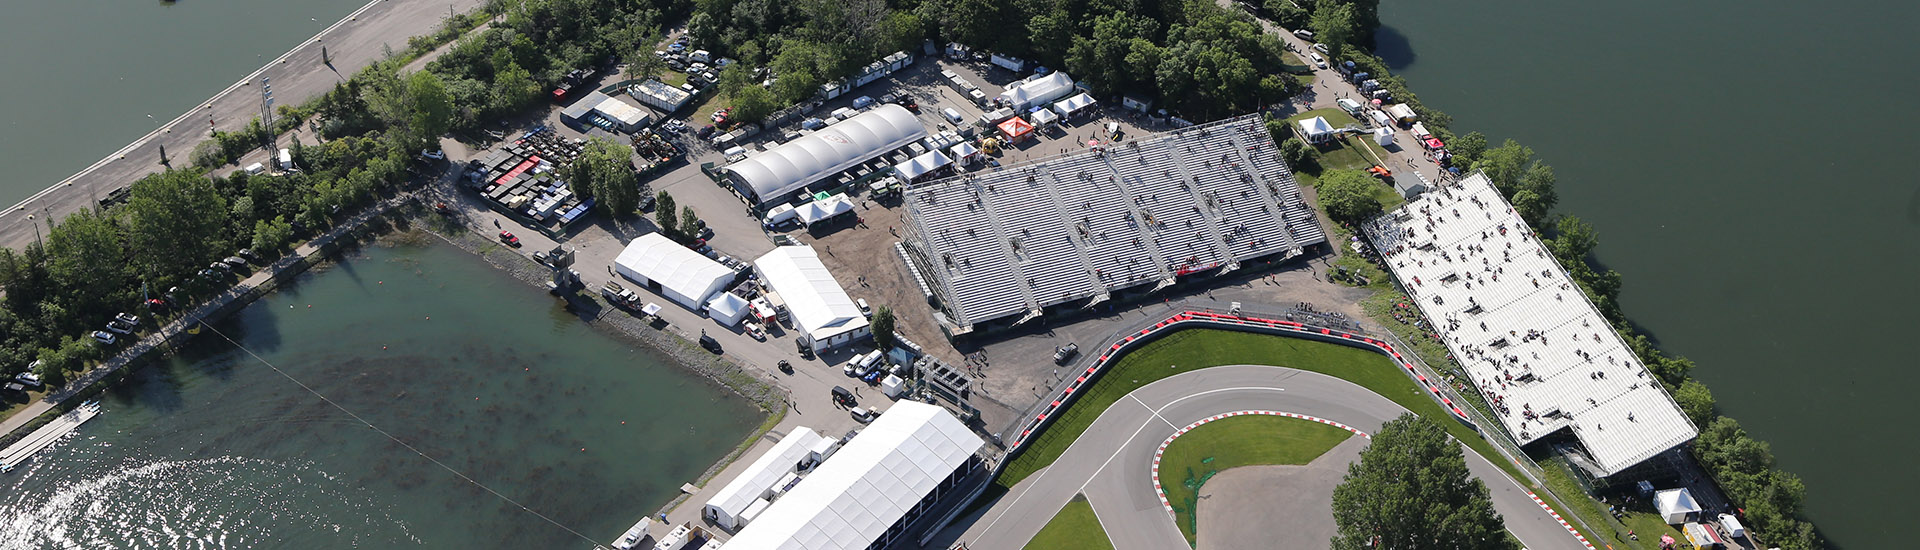 Canadian Grand Prix Grandstand 12 Seating Chart